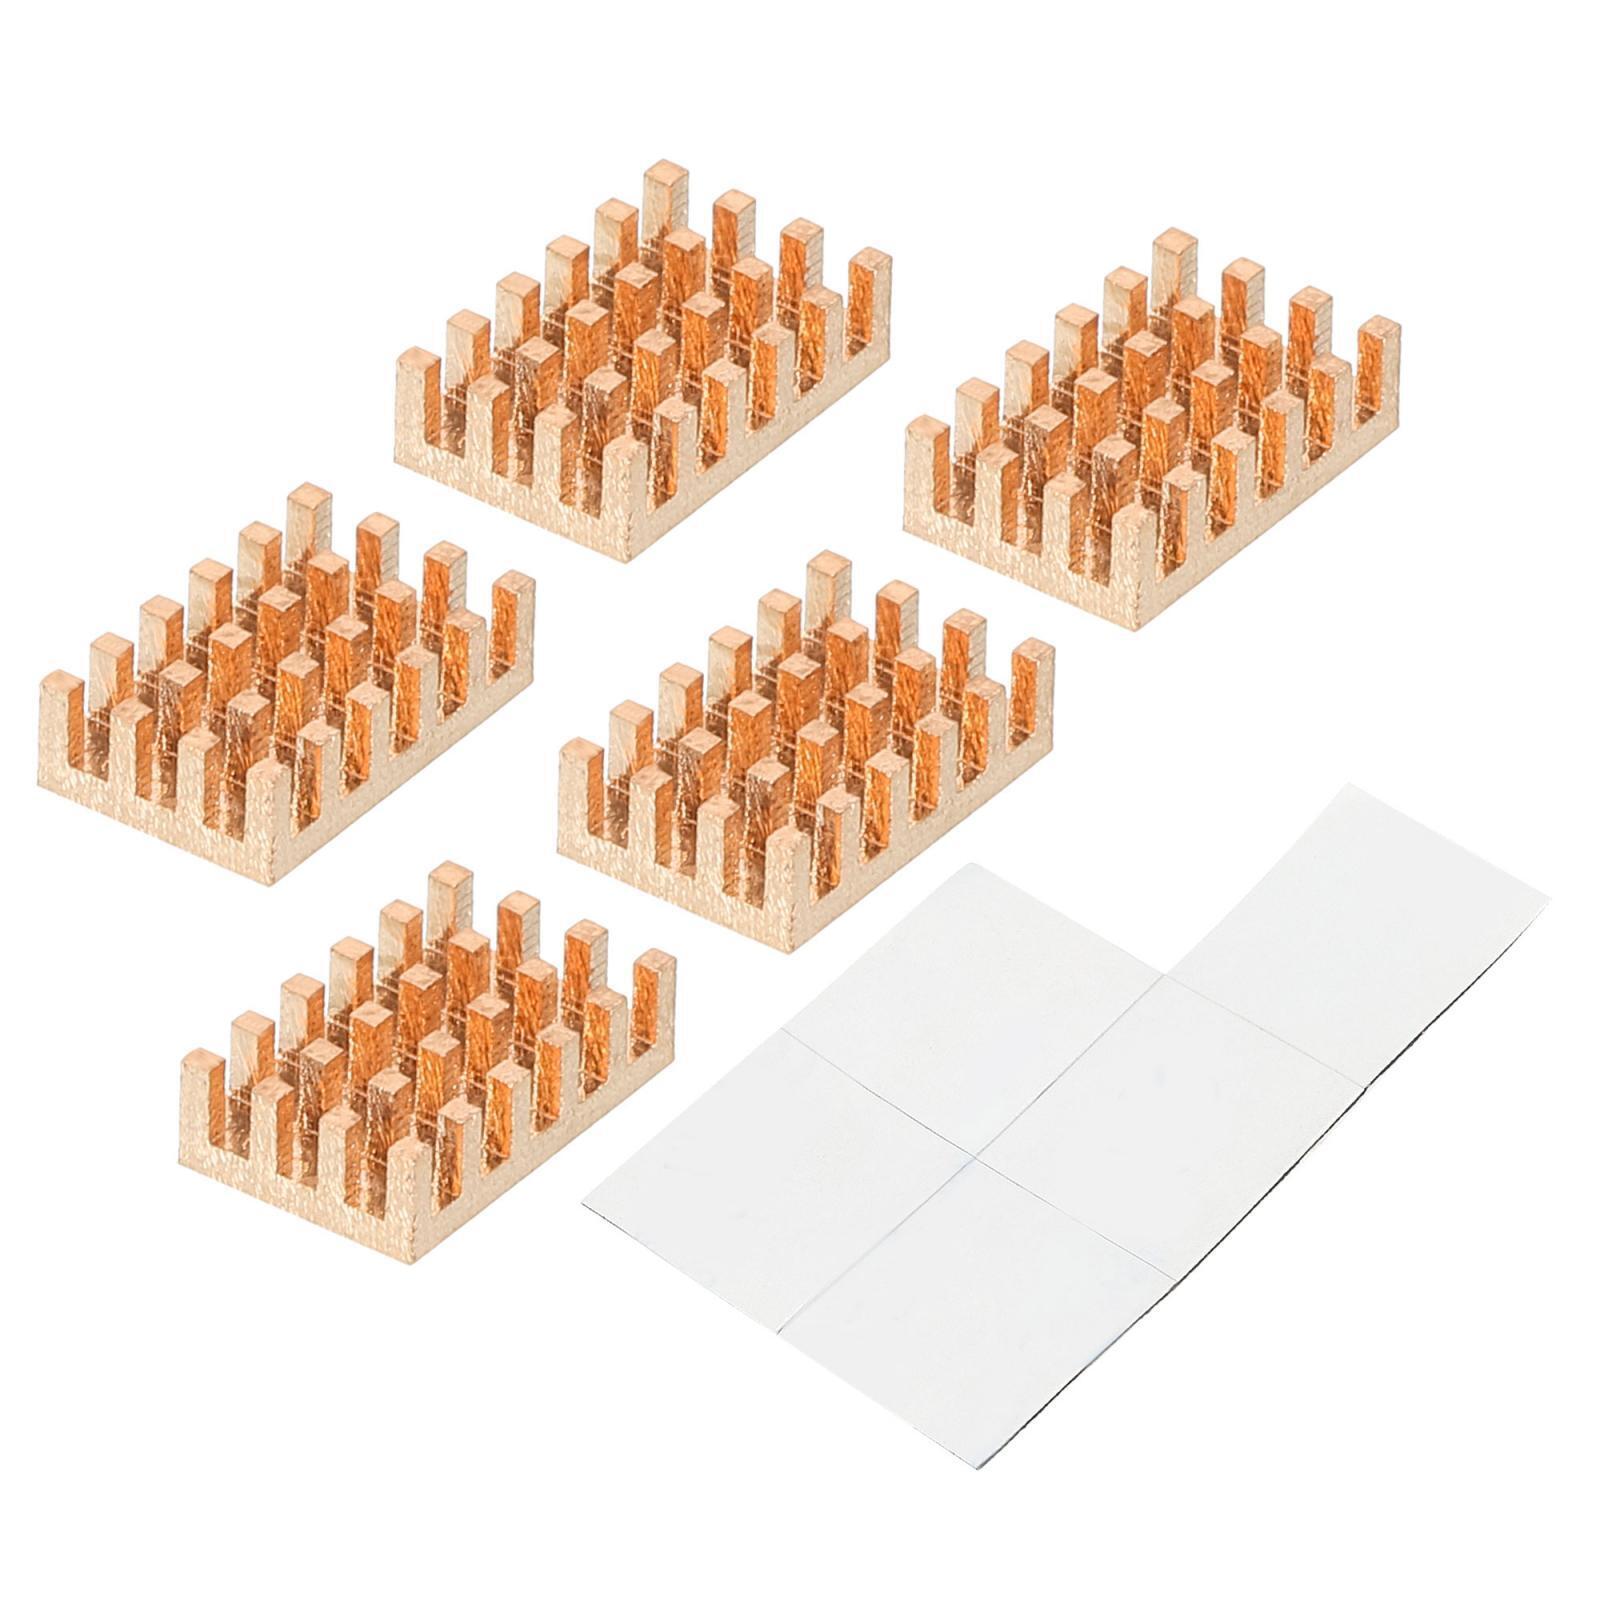 Copper Heatsink 14x9x4mm with Self Adhesive for IC Chipset Cooler 5pcs